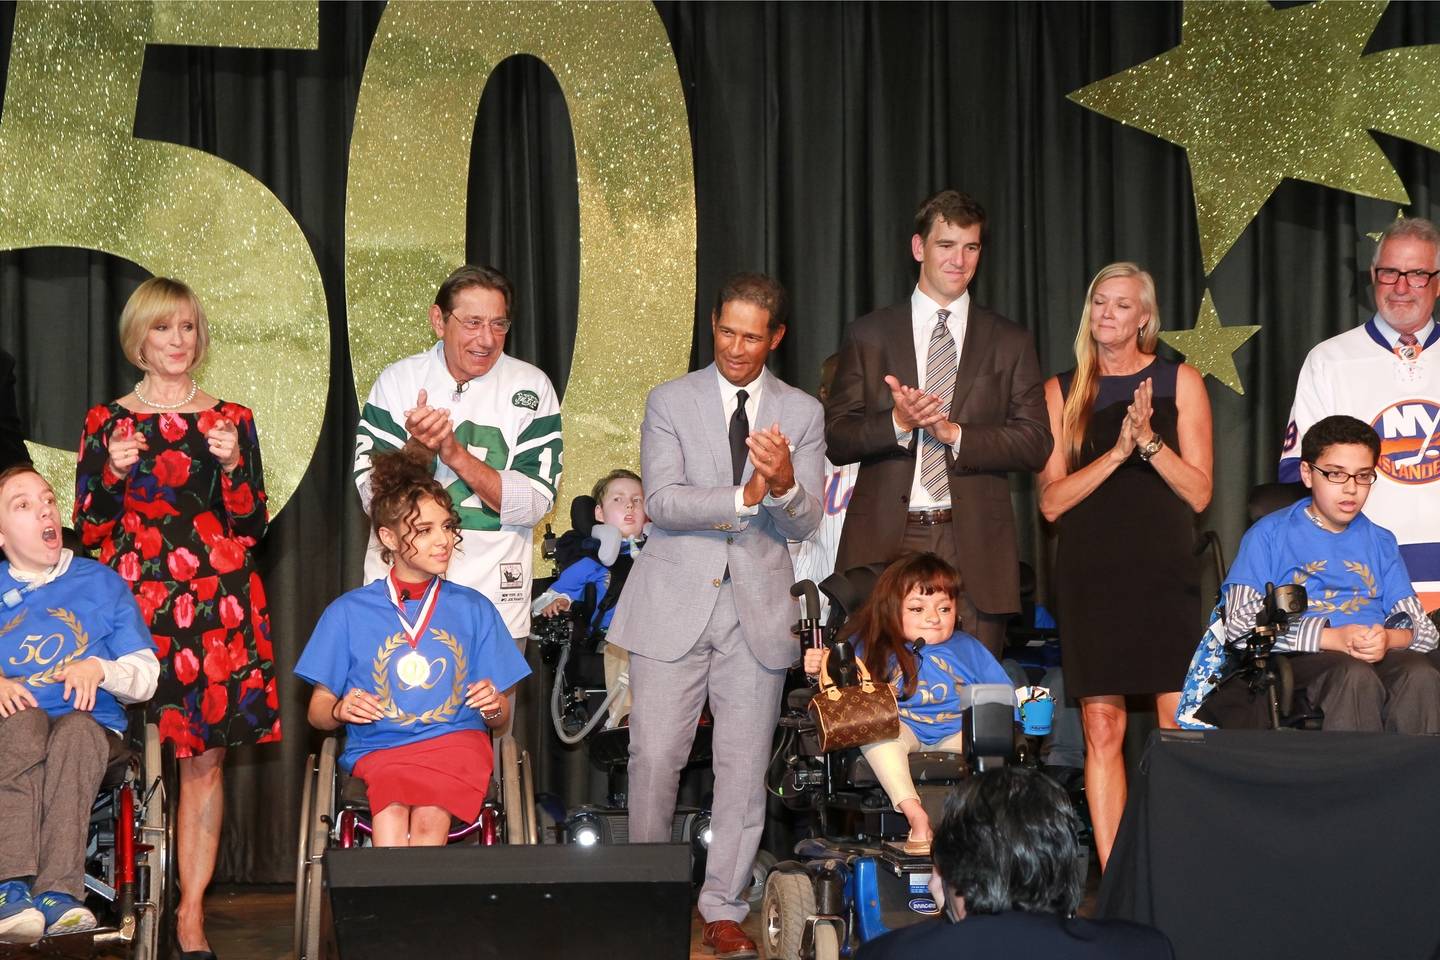 Celebrities, athletes and students on stage for the grand finale of the 50th Annual Celebrity Sports Night.